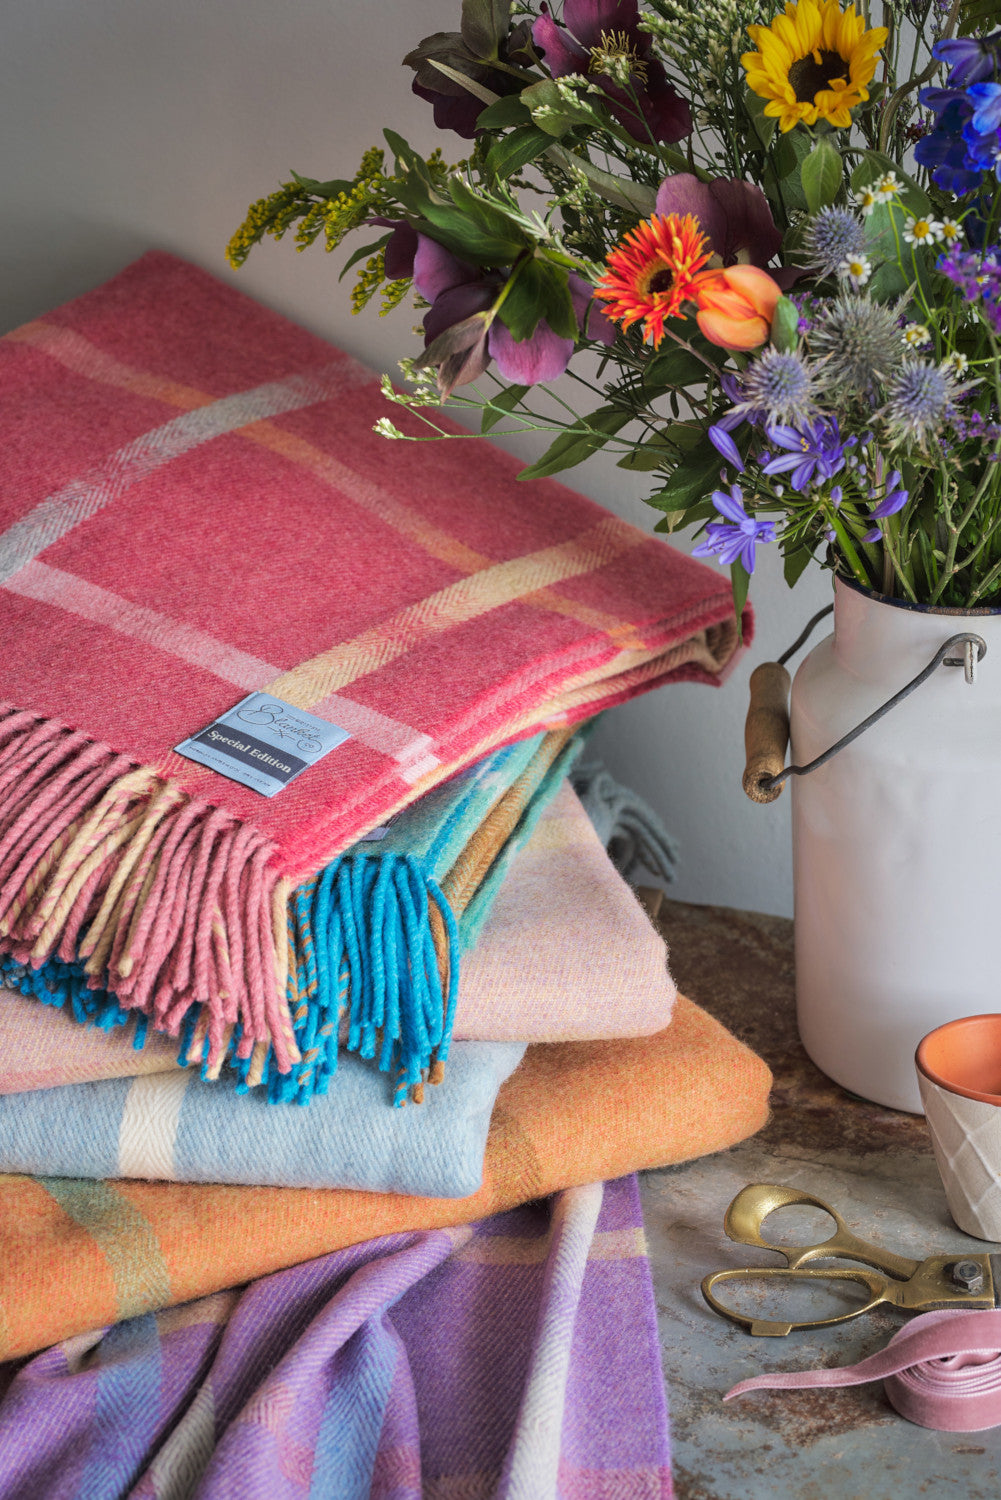 A folded red merino lambswool blanket on top a stack of wool throws beside a pot of flowers